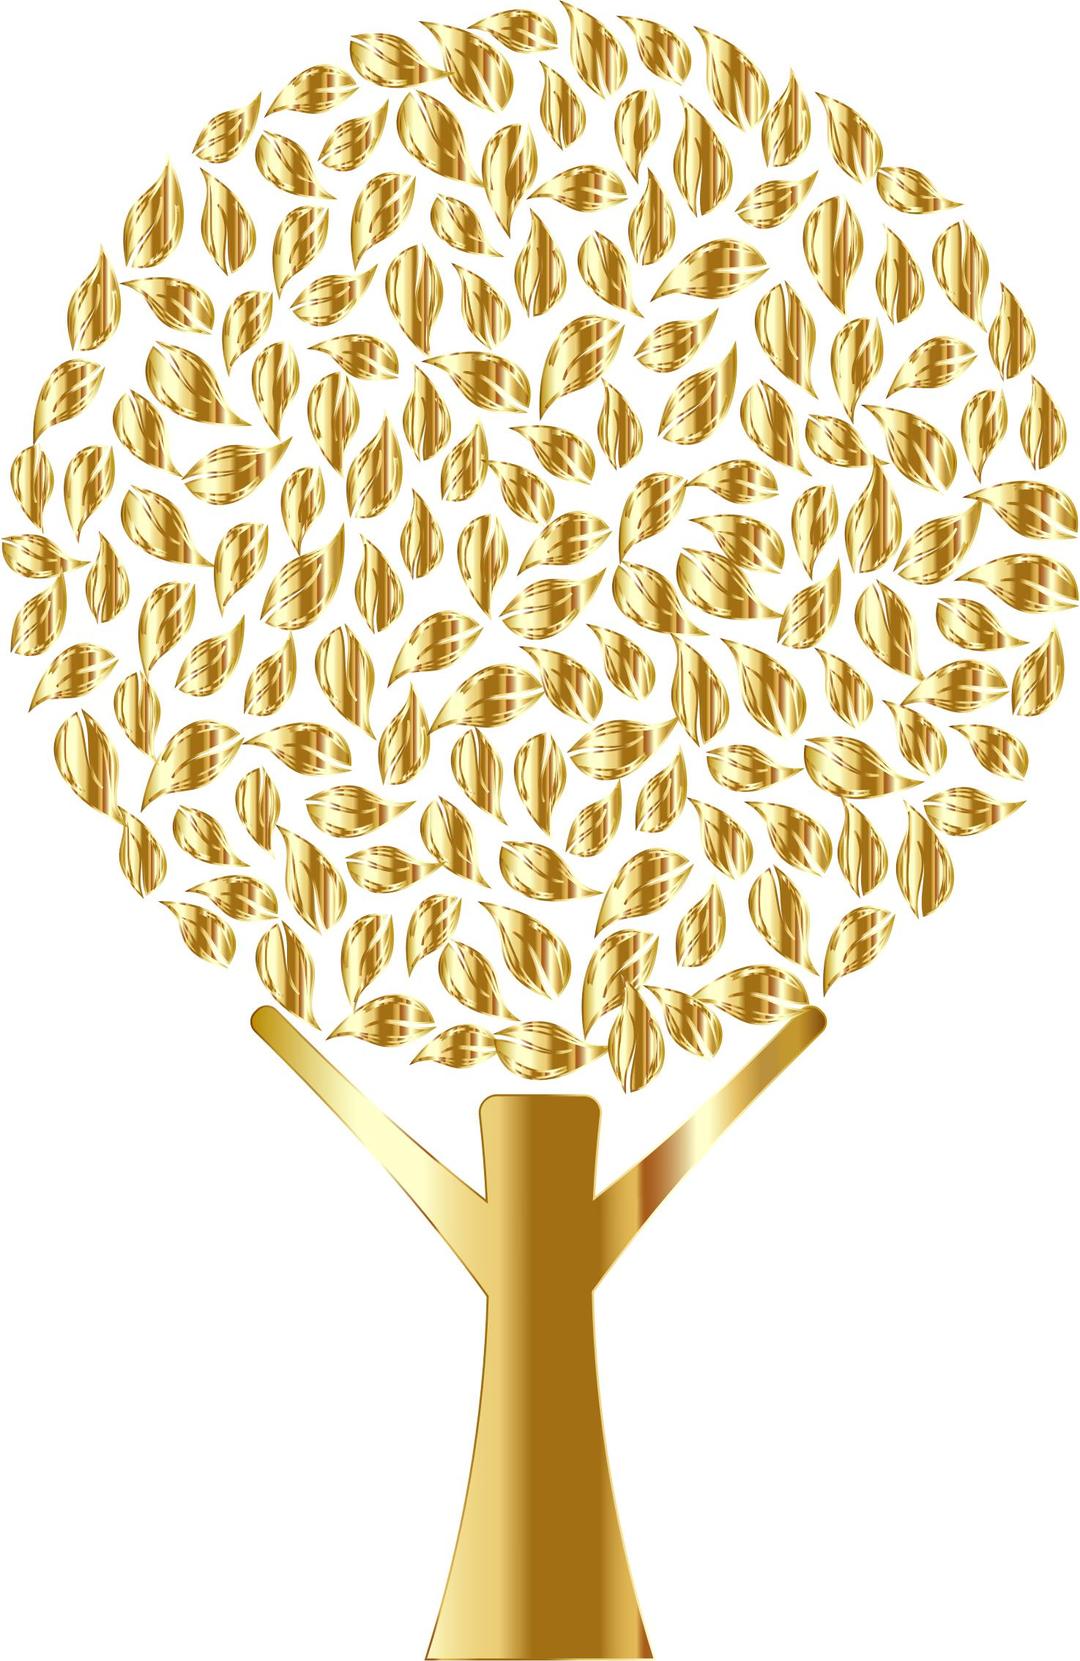 Golden Abstract Tree Variation 2 No Background png transparent